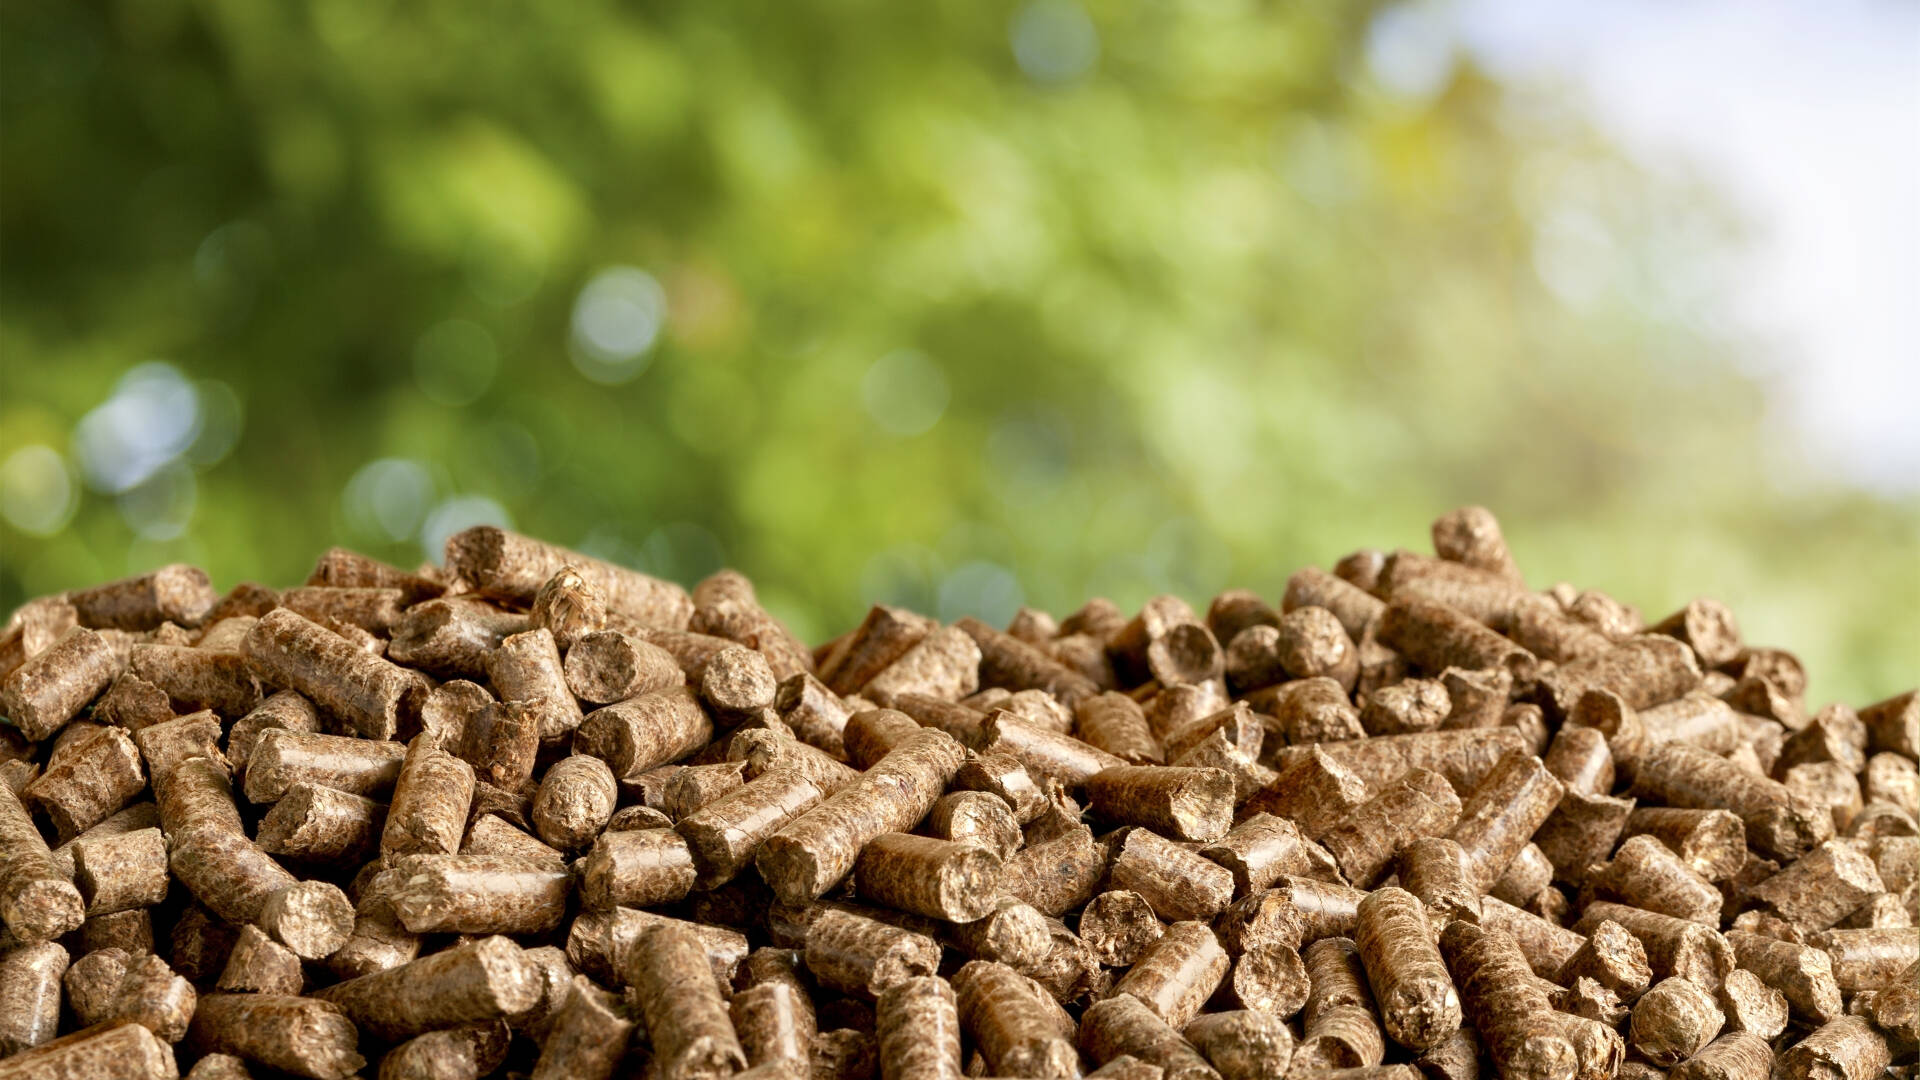 Drax plans to equip two biomass units with CCS